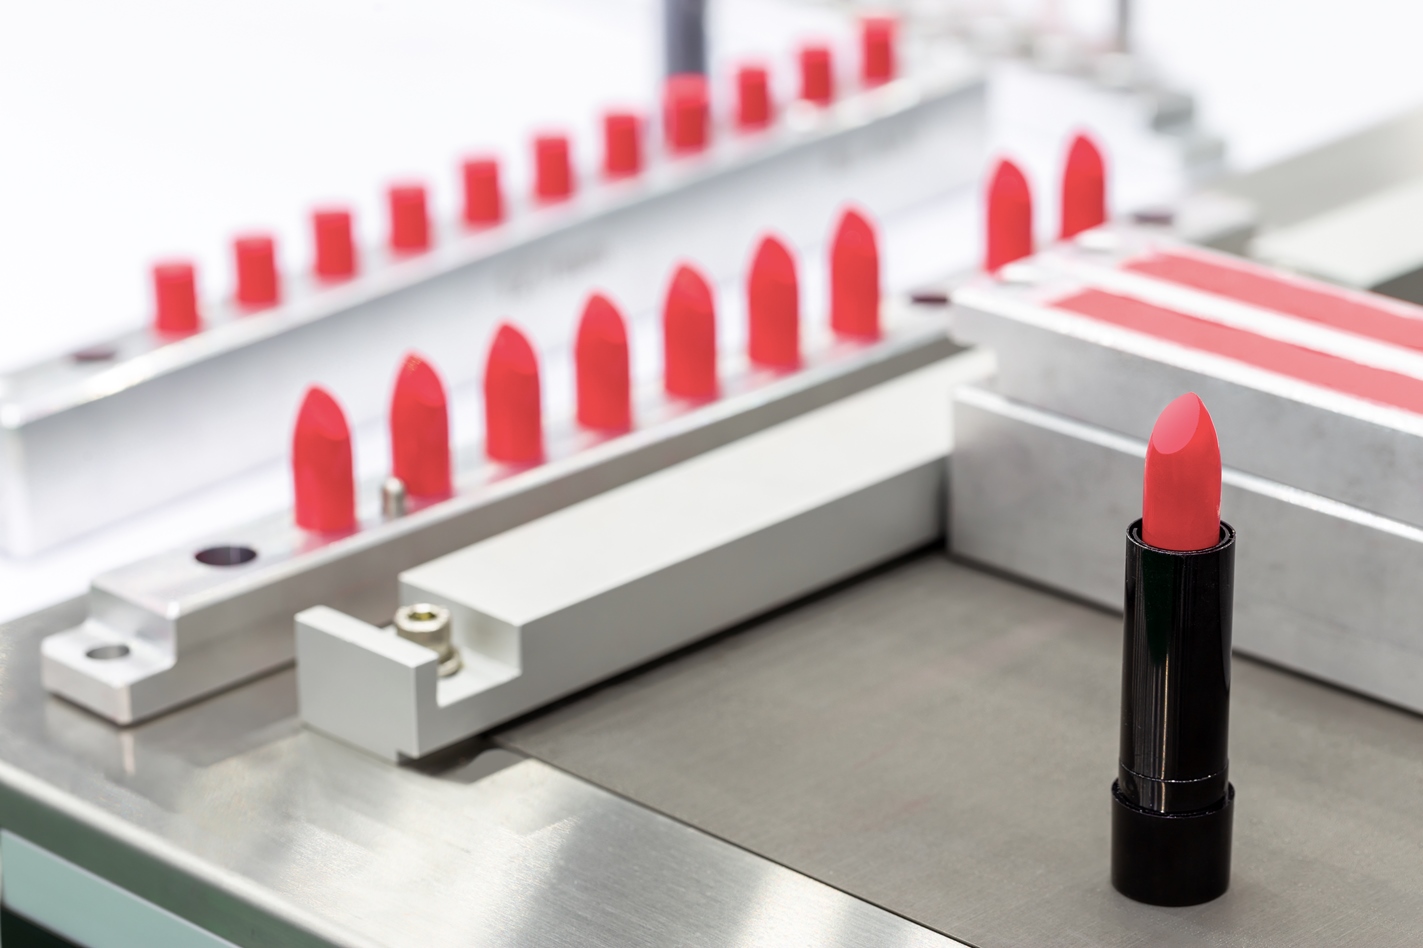 A lipstick vial filling machine optimized with consumer goods LIMS, ELN, LES, and SDMS software in a cosmetics factory.